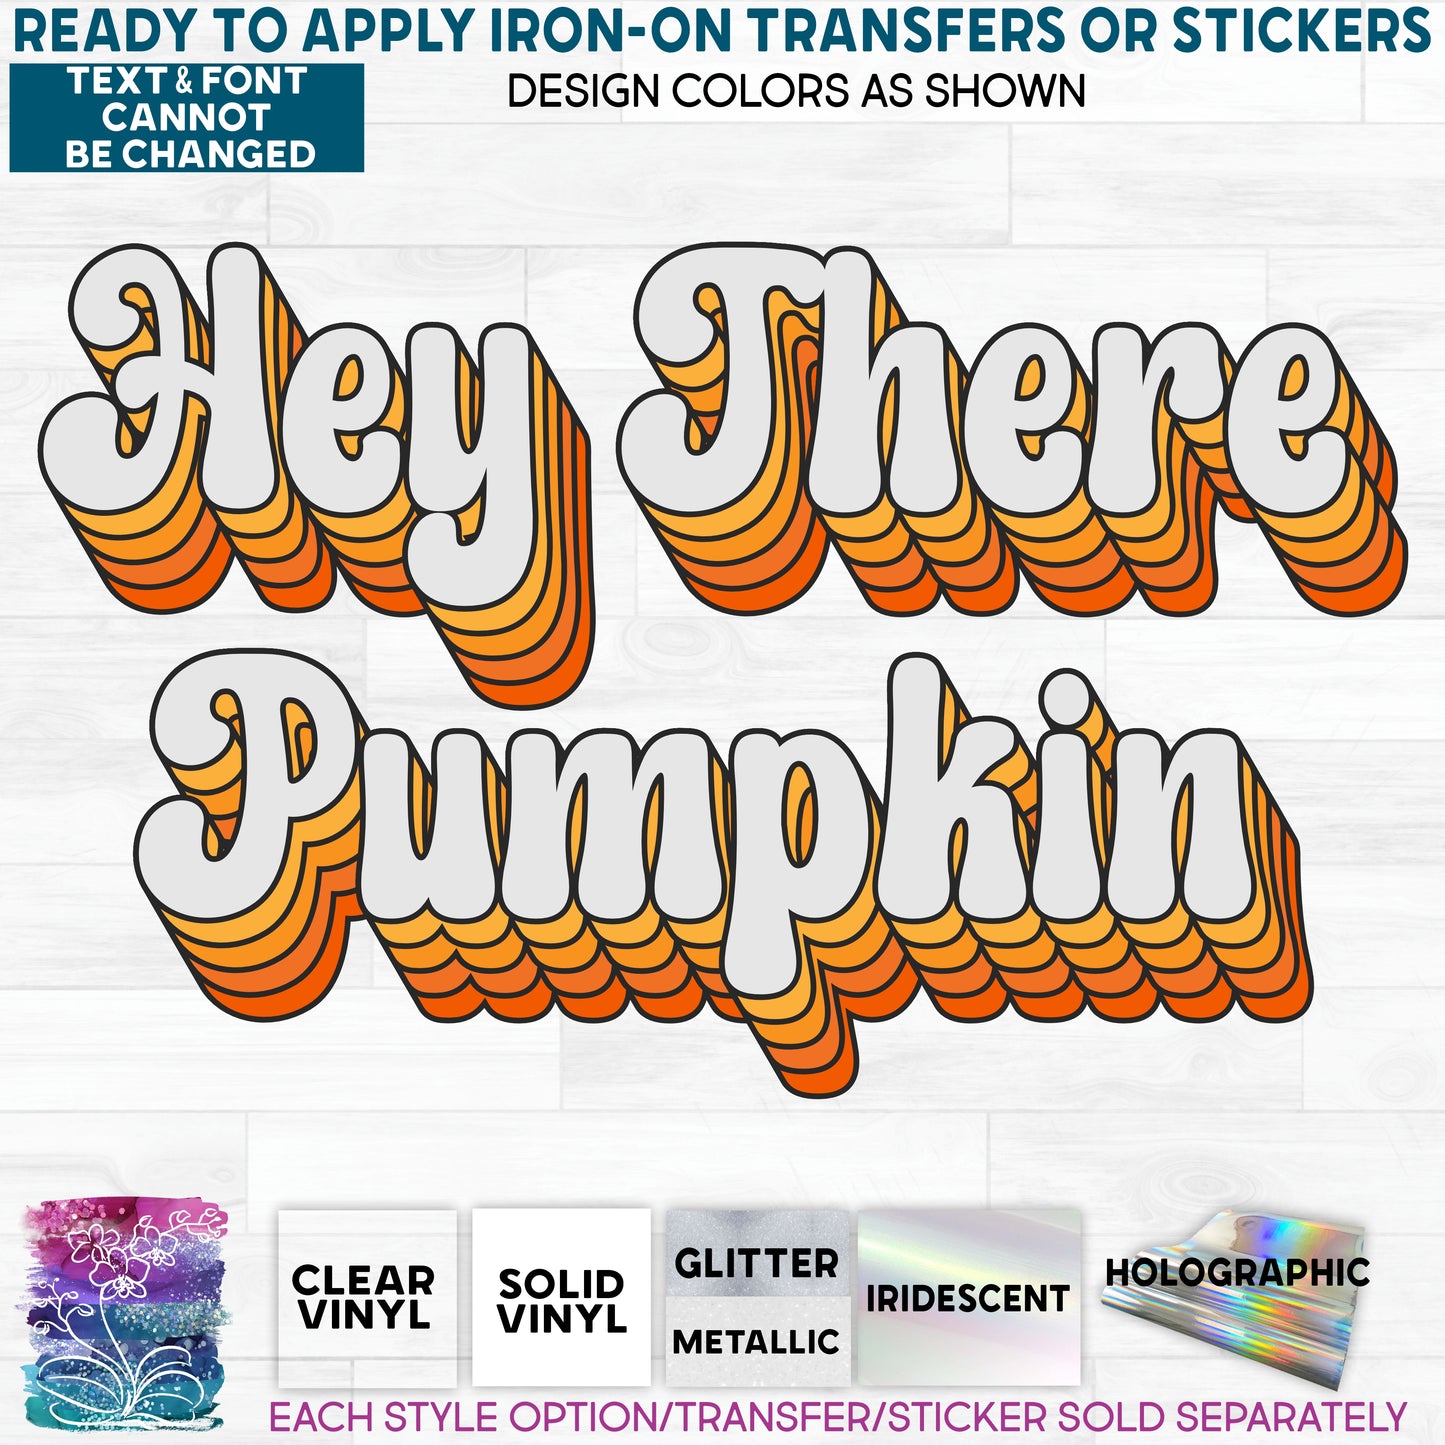 SBS-385-1 Hey There Pumpkin Layered Text Made-to-Order Iron-On Transfer or Sticker